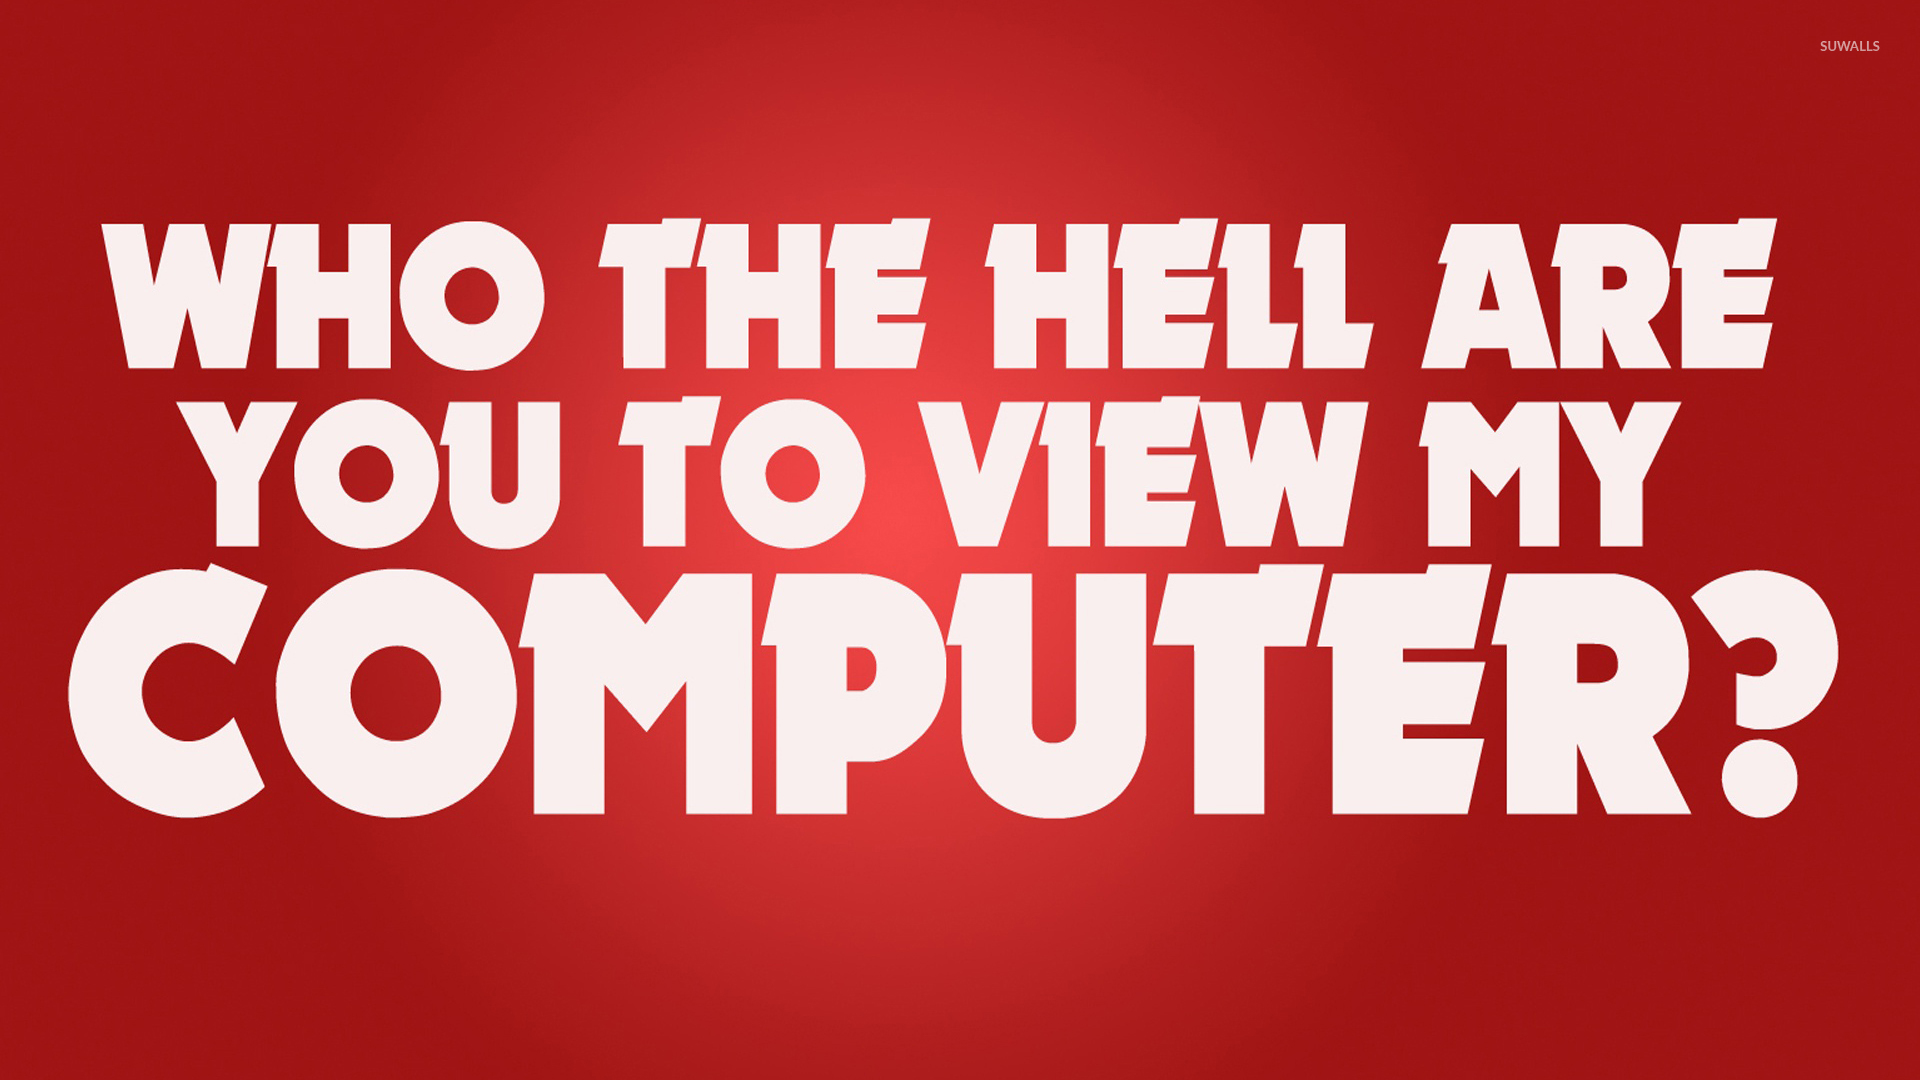 Hell Are You To Open My Computer - HD Wallpaper 